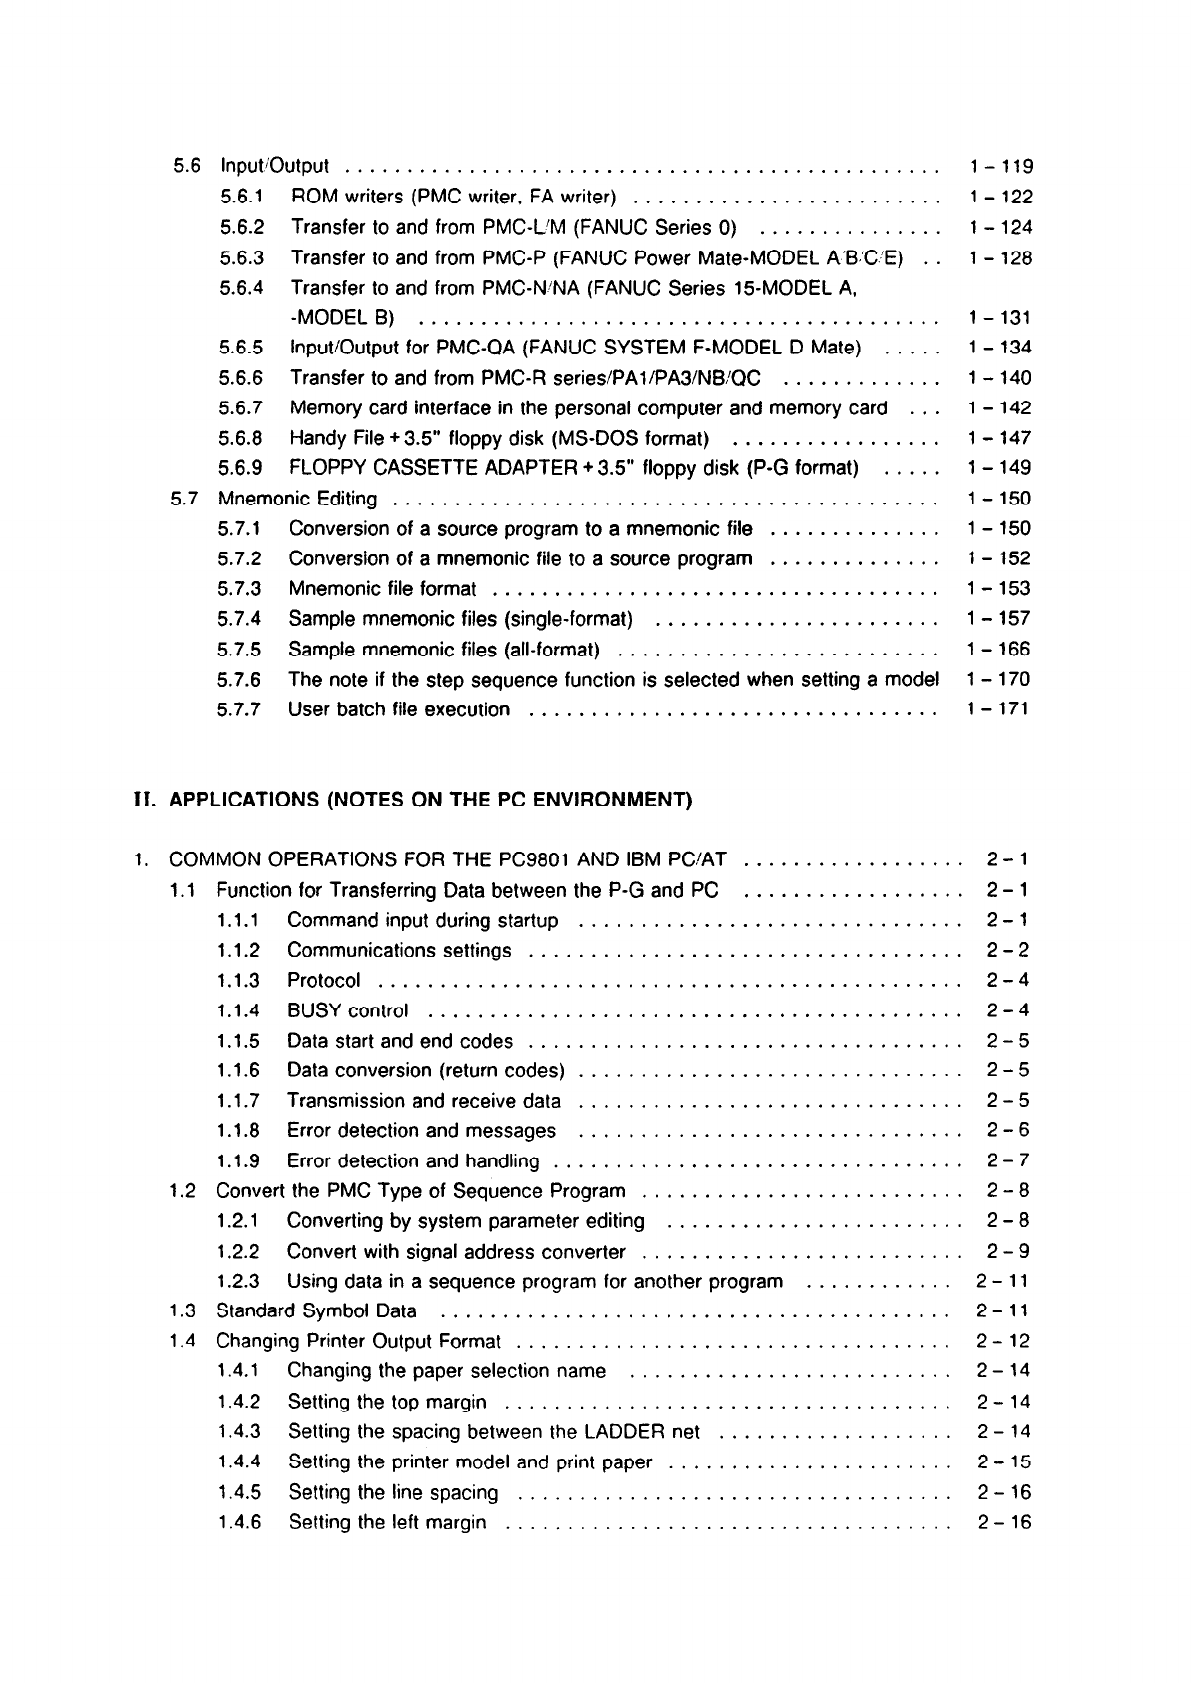 FAPT Ladder for PC Operators manual Page 4 of 311 | Fanuc CNC